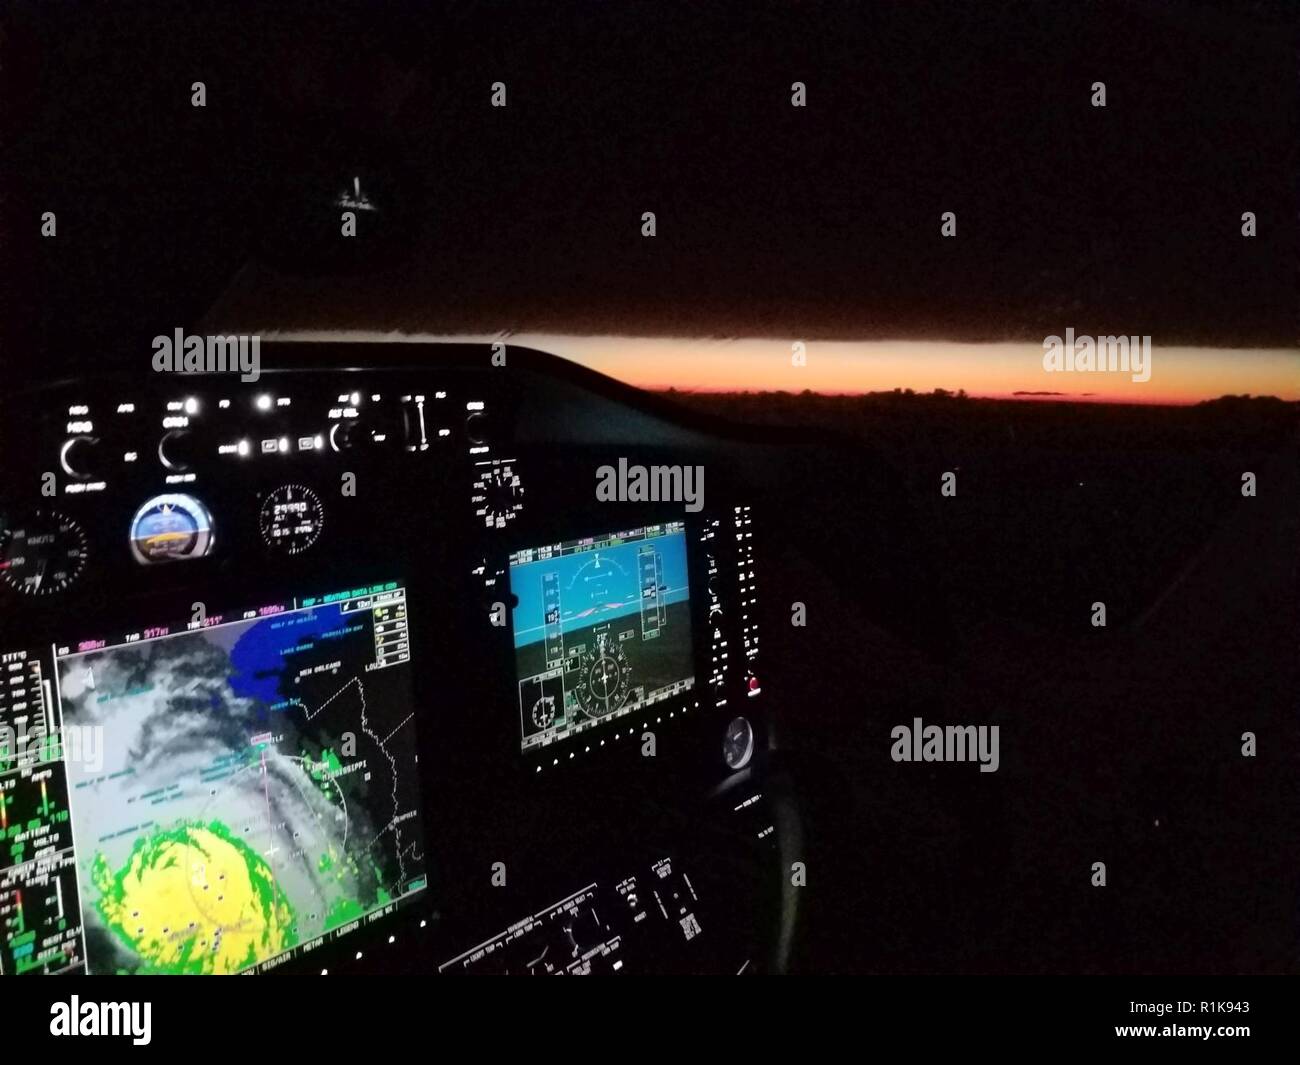 U.S. Coast Guard Auxiliary aircraft navigation system displays the remnants of Hurricane Michael during a flight to Panama City, Florida, Oct. 11, 2018. Coast Guard personnel were transported to establish a forward operating base in Panama City. Stock Photo